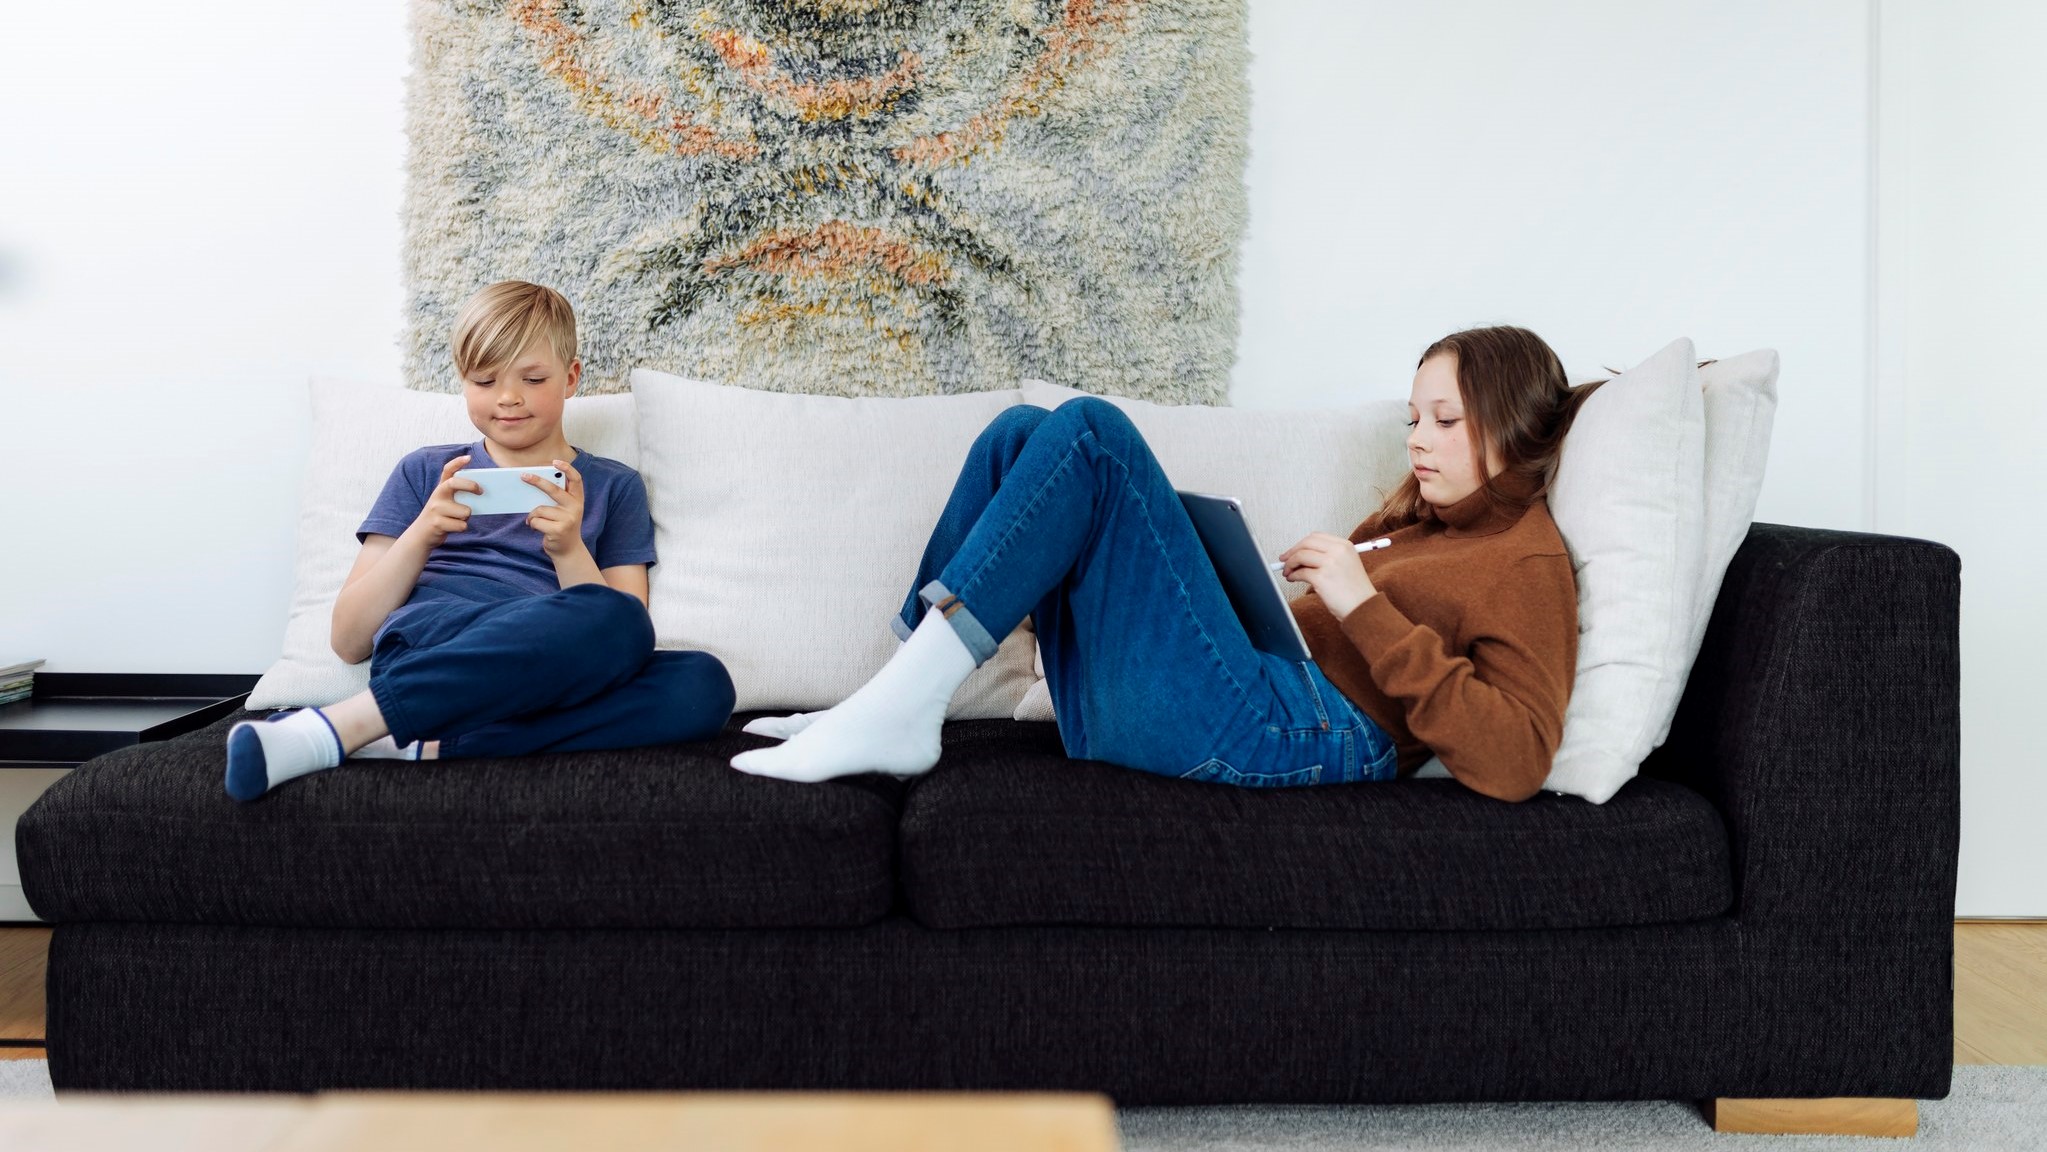 Kids on a couch using smart devices. (Image: Mika Pakarinen, Keksi/LVM)